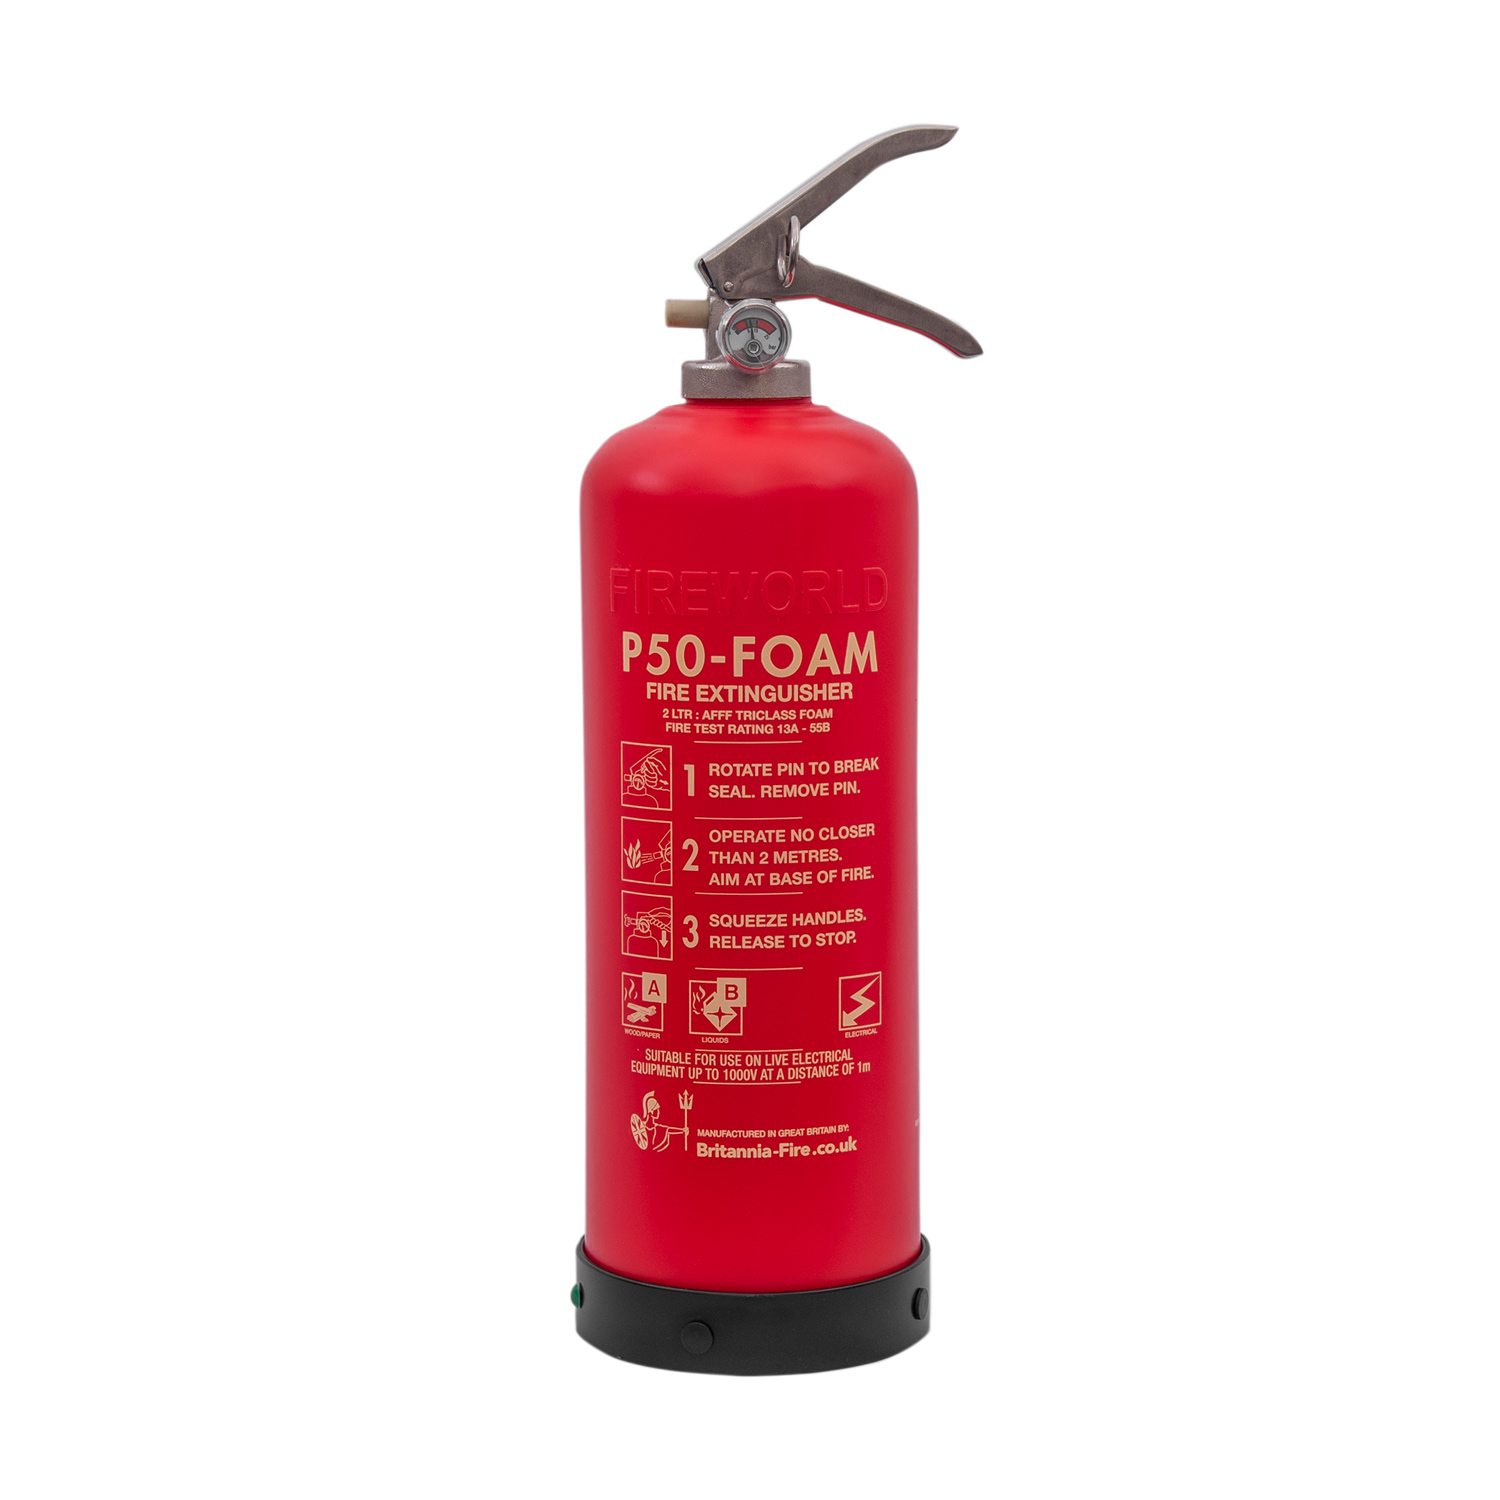 Image of the P50 2ltr Foam Fire Extinguisher